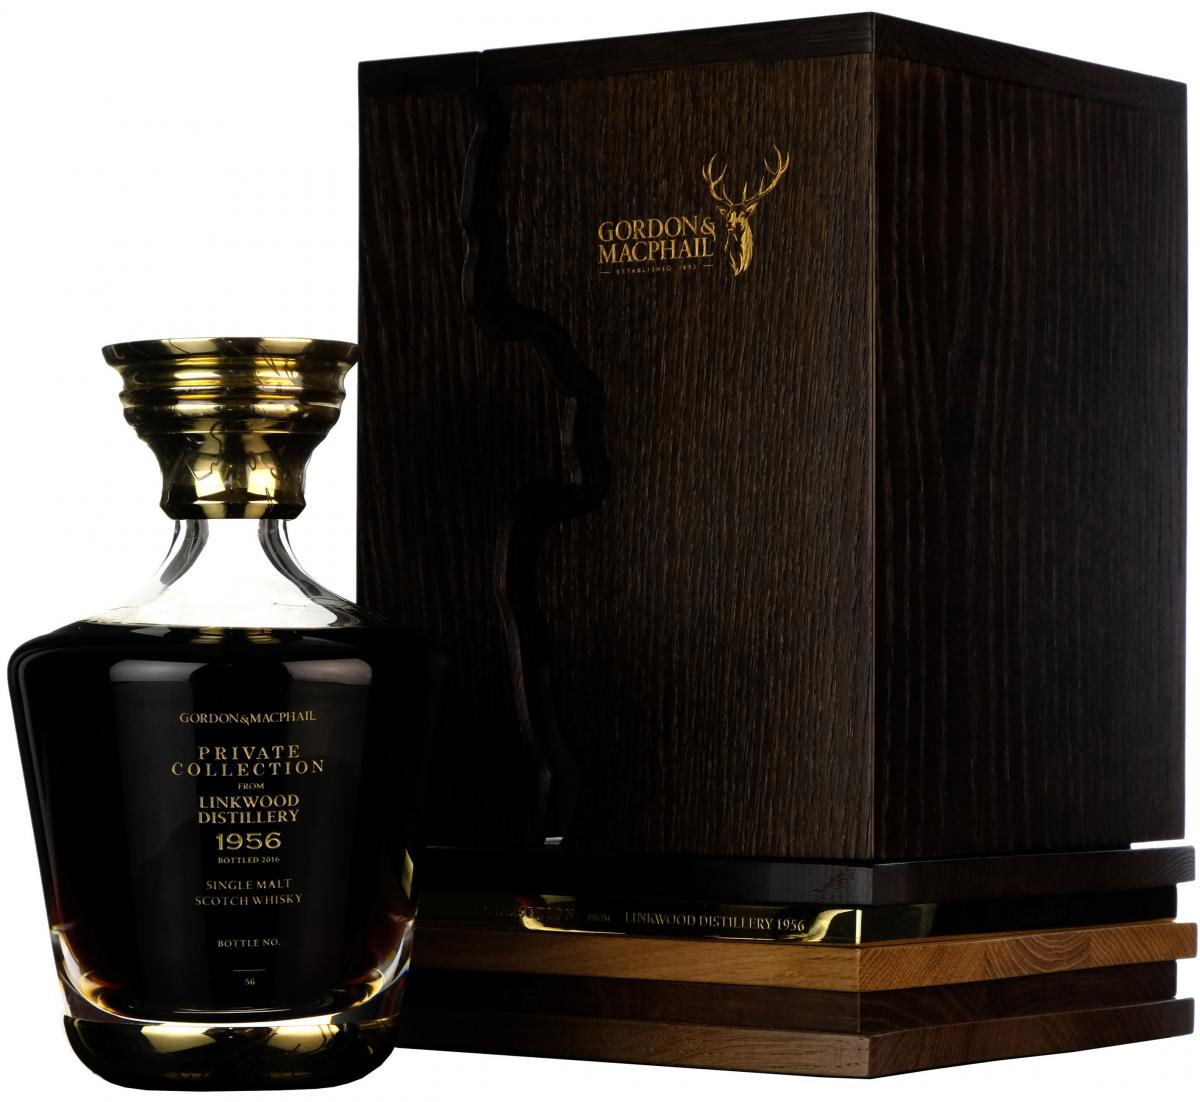 gordon & macphail, private collection, linkwood 1956, single cask number 20, 60 year old,